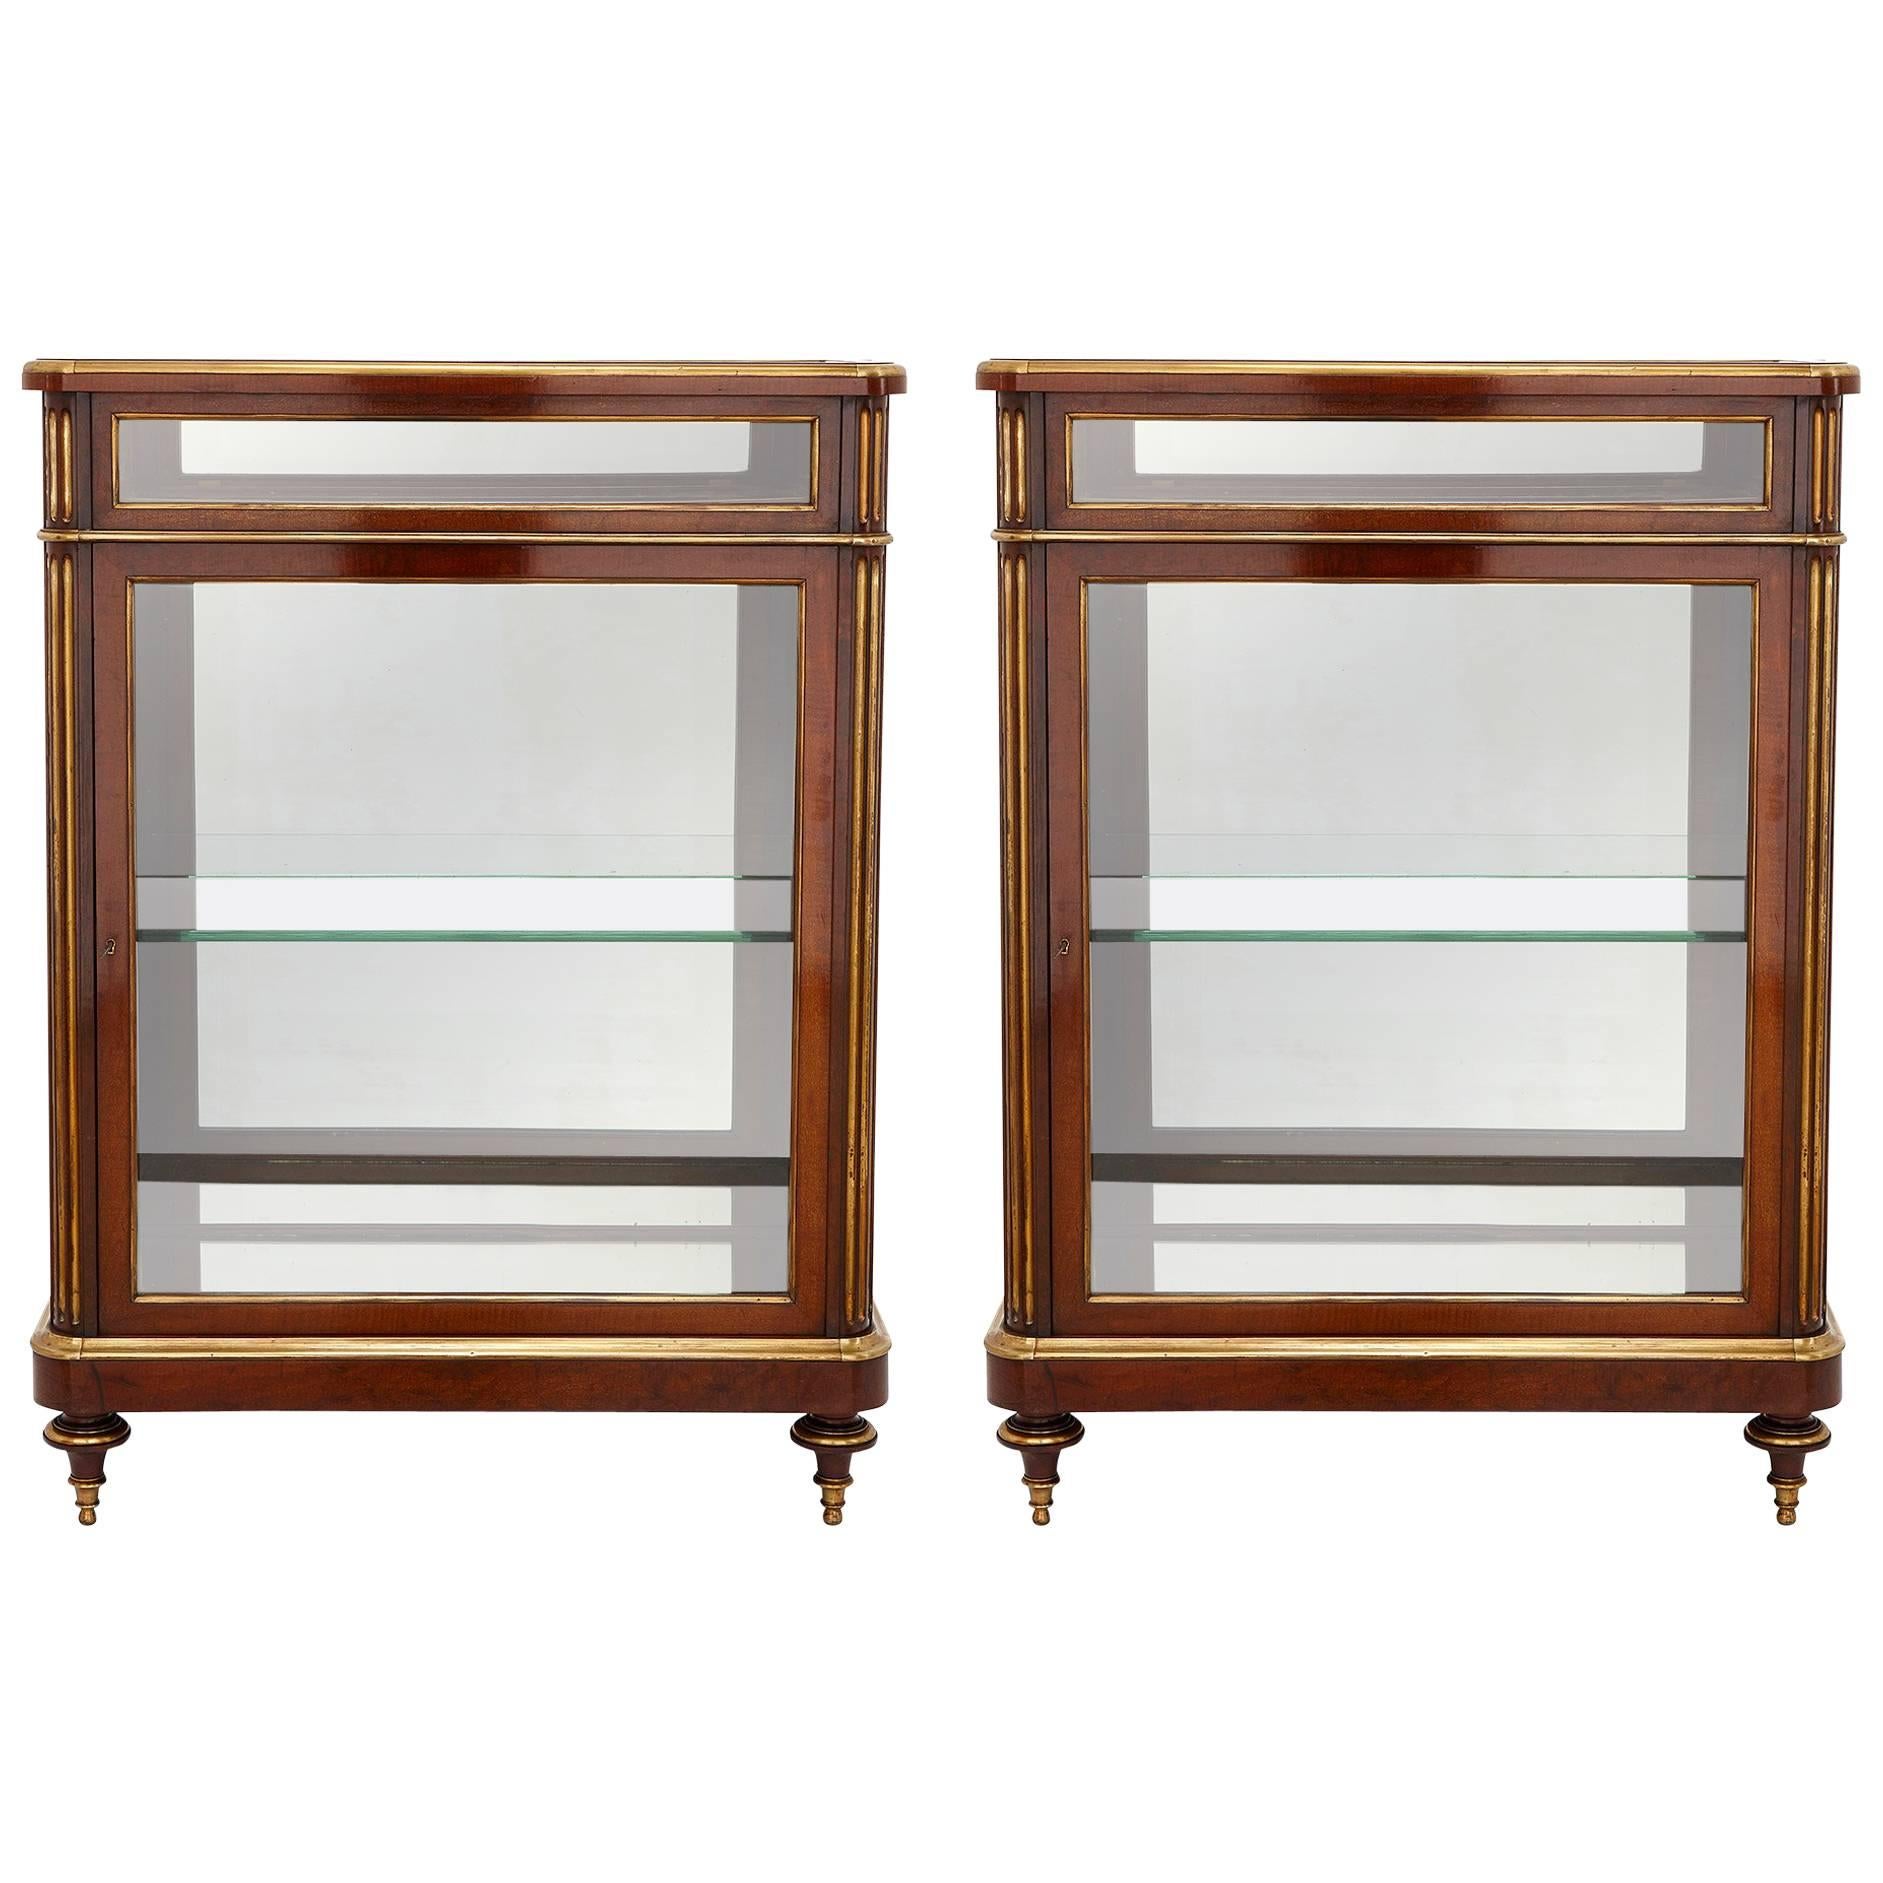 Two Glass and Mahogany Display Cabinets, 19th Century, France For Sale